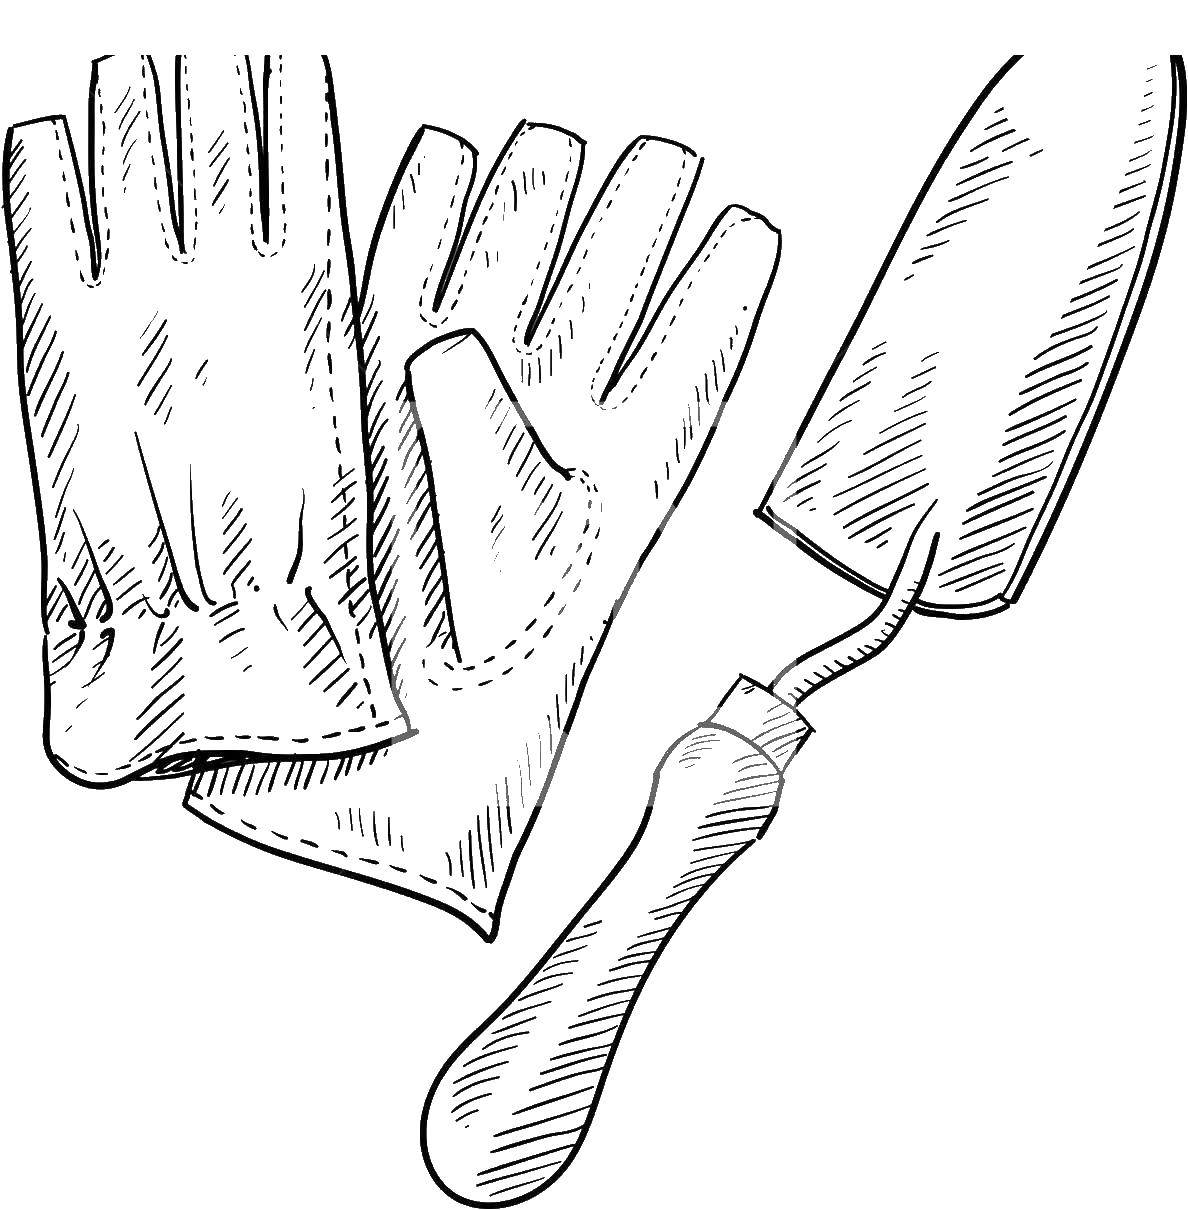 Coloring Gloves and a shovel. Category the objects. Tags:  items, gloves, shovel.